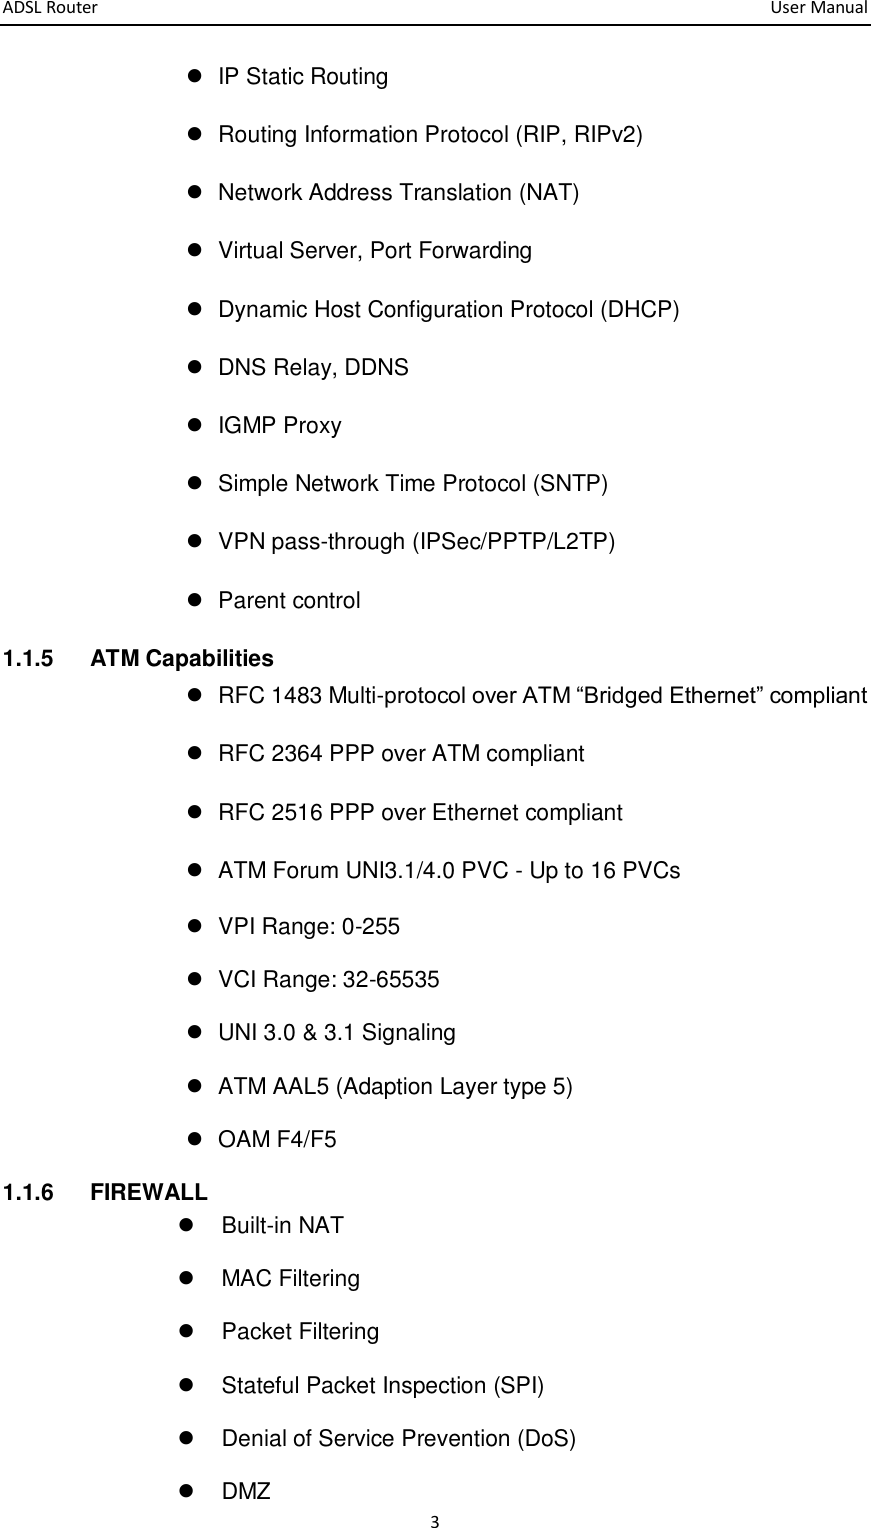 ADSL Router       User Manual 3   IP Static Routing   Routing Information Protocol (RIP, RIPv2)   Network Address Translation (NAT)   Virtual Server, Port Forwarding   Dynamic Host Configuration Protocol (DHCP)   DNS Relay, DDNS   IGMP Proxy   Simple Network Time Protocol (SNTP)   VPN pass-through (IPSec/PPTP/L2TP)   Parent control 1.1.5  ATM Capabilities   RFC 1483 Multi-protocol over ATM “Bridged Ethernet” compliant   RFC 2364 PPP over ATM compliant   RFC 2516 PPP over Ethernet compliant     ATM Forum UNI3.1/4.0 PVC - Up to 16 PVCs   VPI Range: 0-255   VCI Range: 32-65535   UNI 3.0 &amp; 3.1 Signaling     ATM AAL5 (Adaption Layer type 5)     OAM F4/F5 1.1.6  FIREWALL   Built-in NAT   MAC Filtering   Packet Filtering   Stateful Packet Inspection (SPI)   Denial of Service Prevention (DoS)   DMZ 